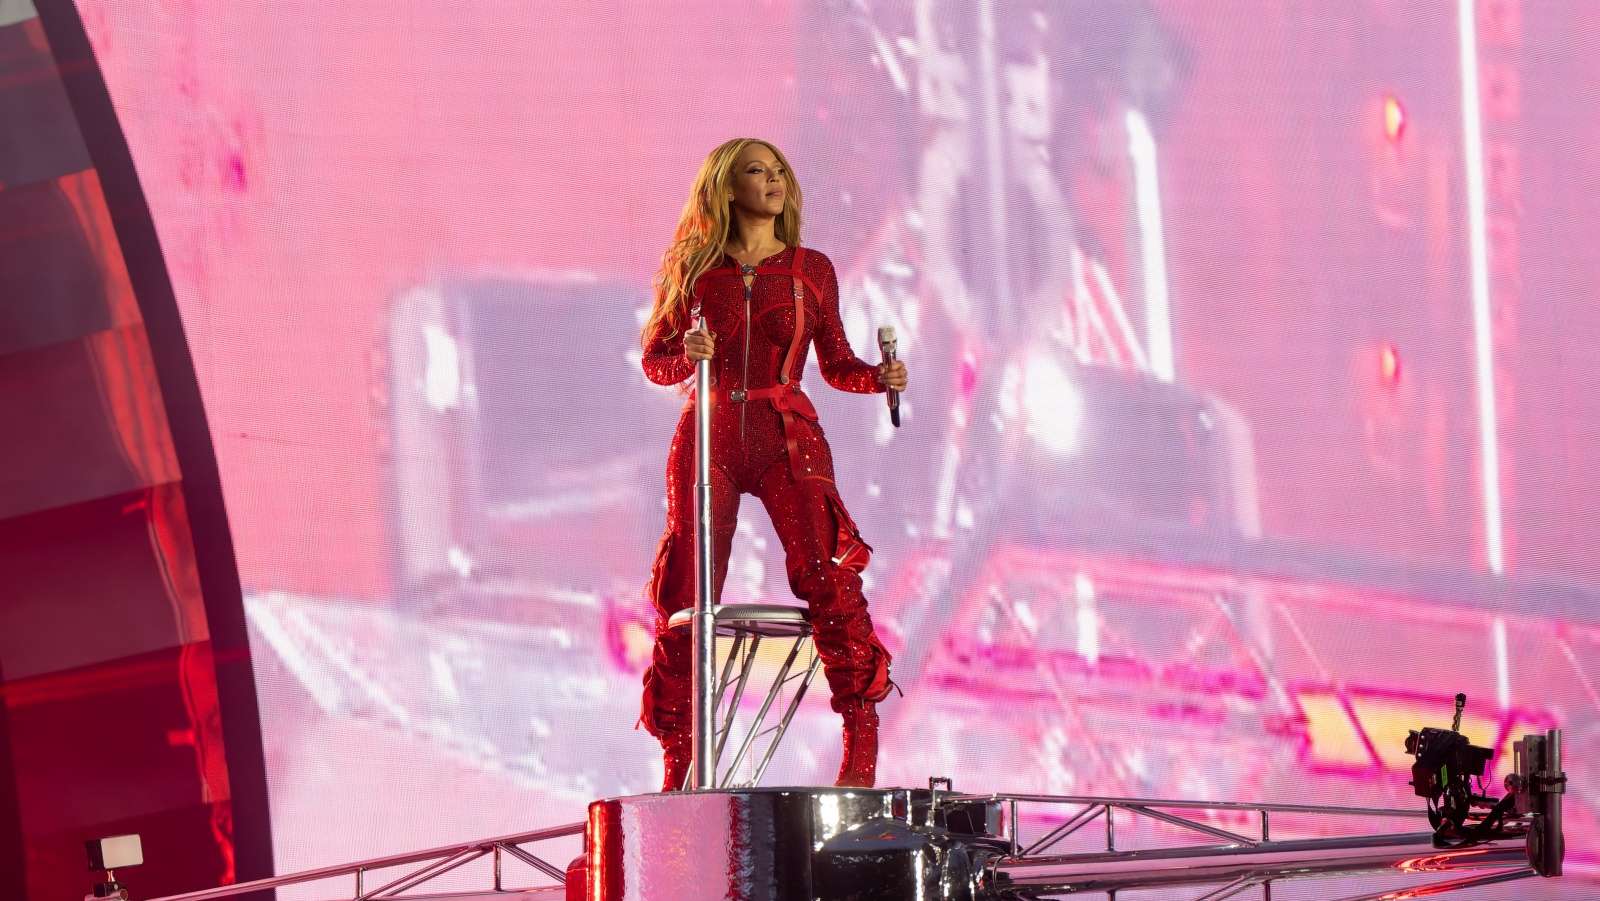 Beyonce perfomring in a red jumpsuit on a stage in concert in front of a pink backdrop